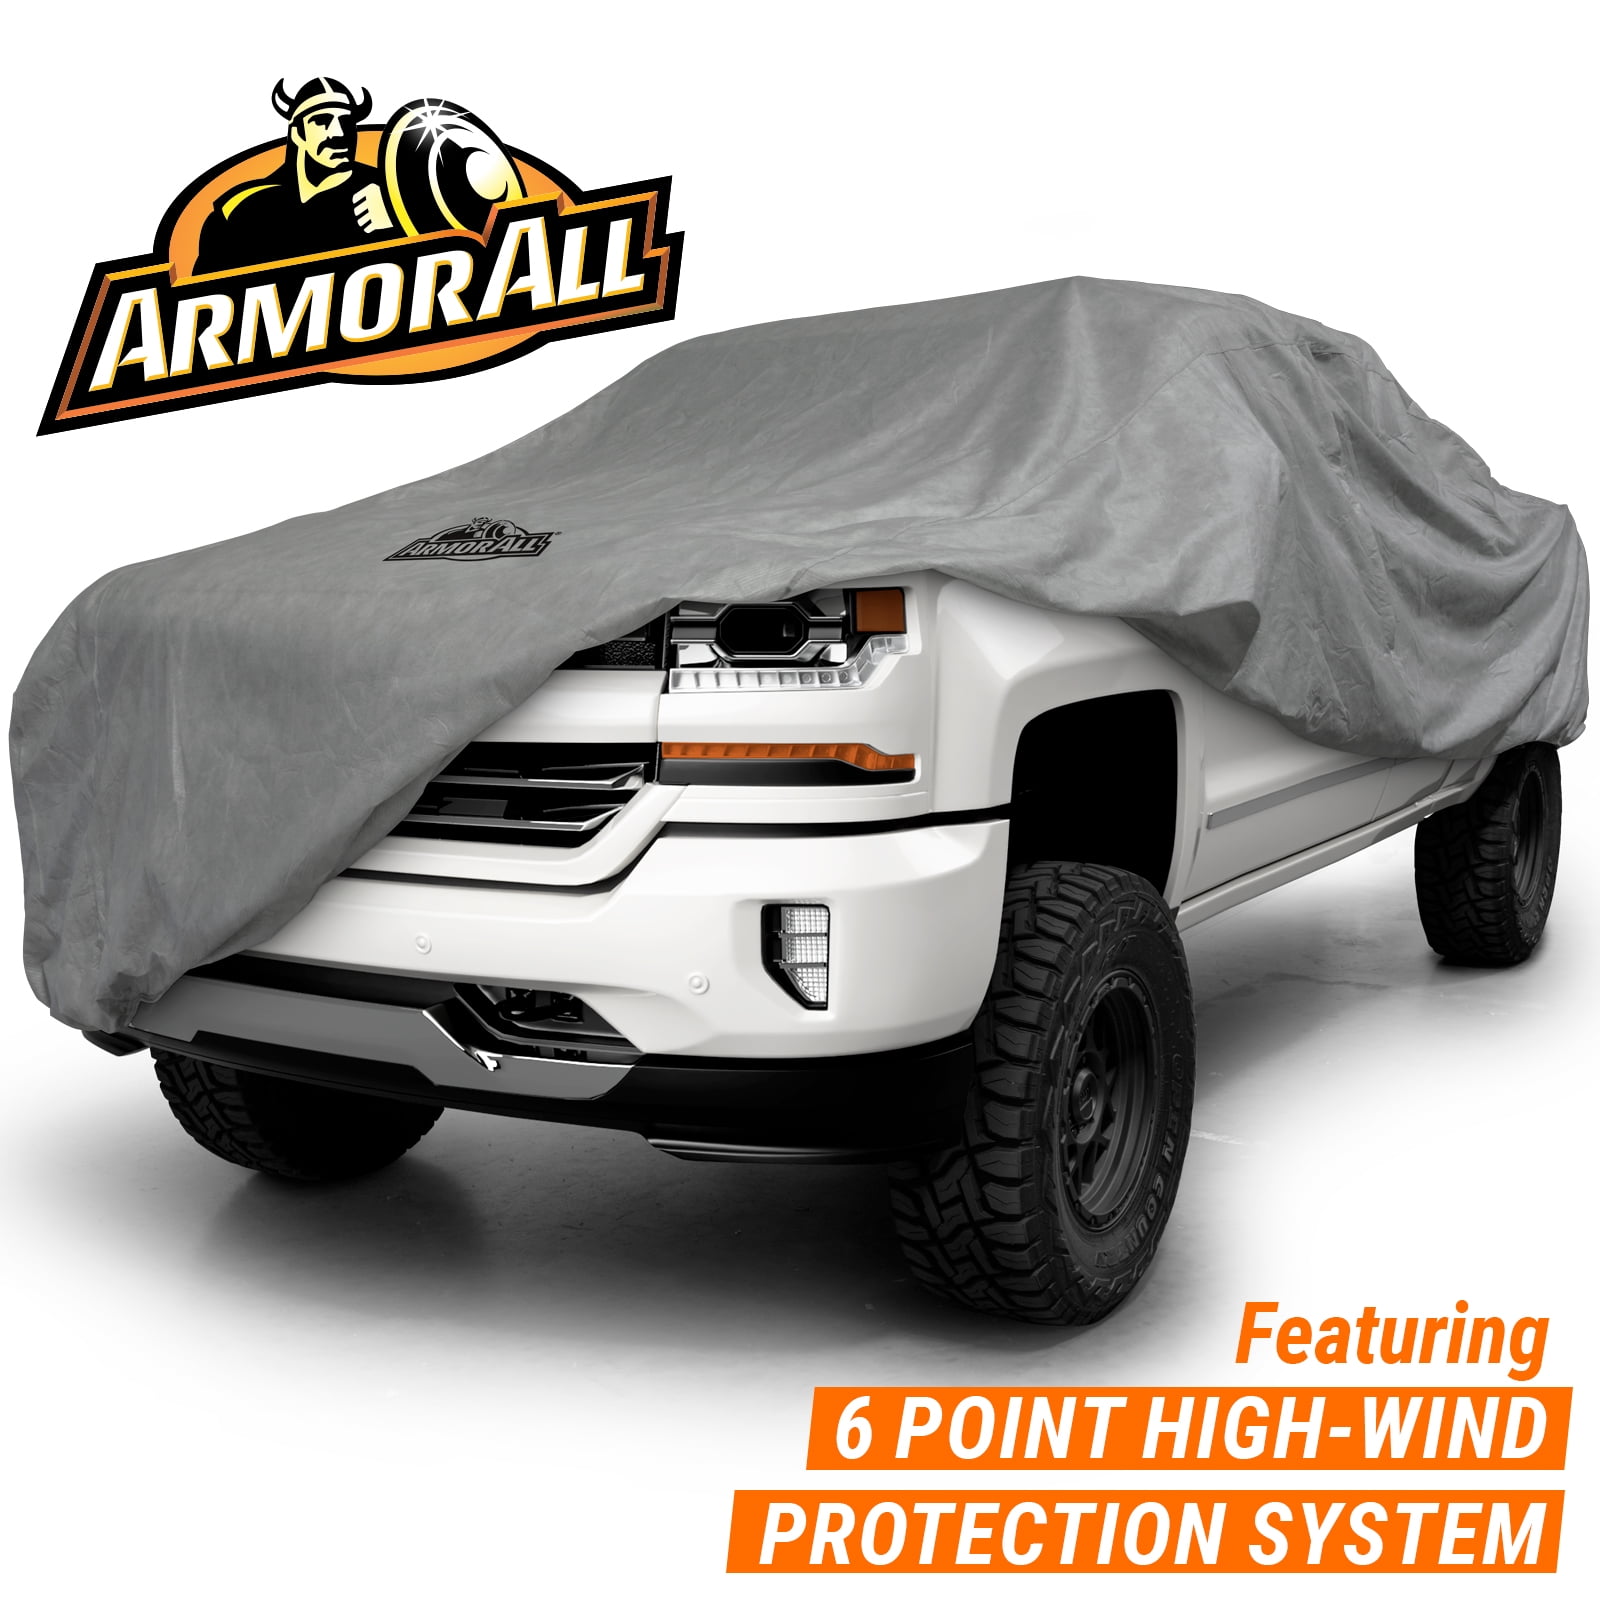 Armor All Truck Cover, Heavy Duty All Weather Protection, Fits Trucks  Length up to 249